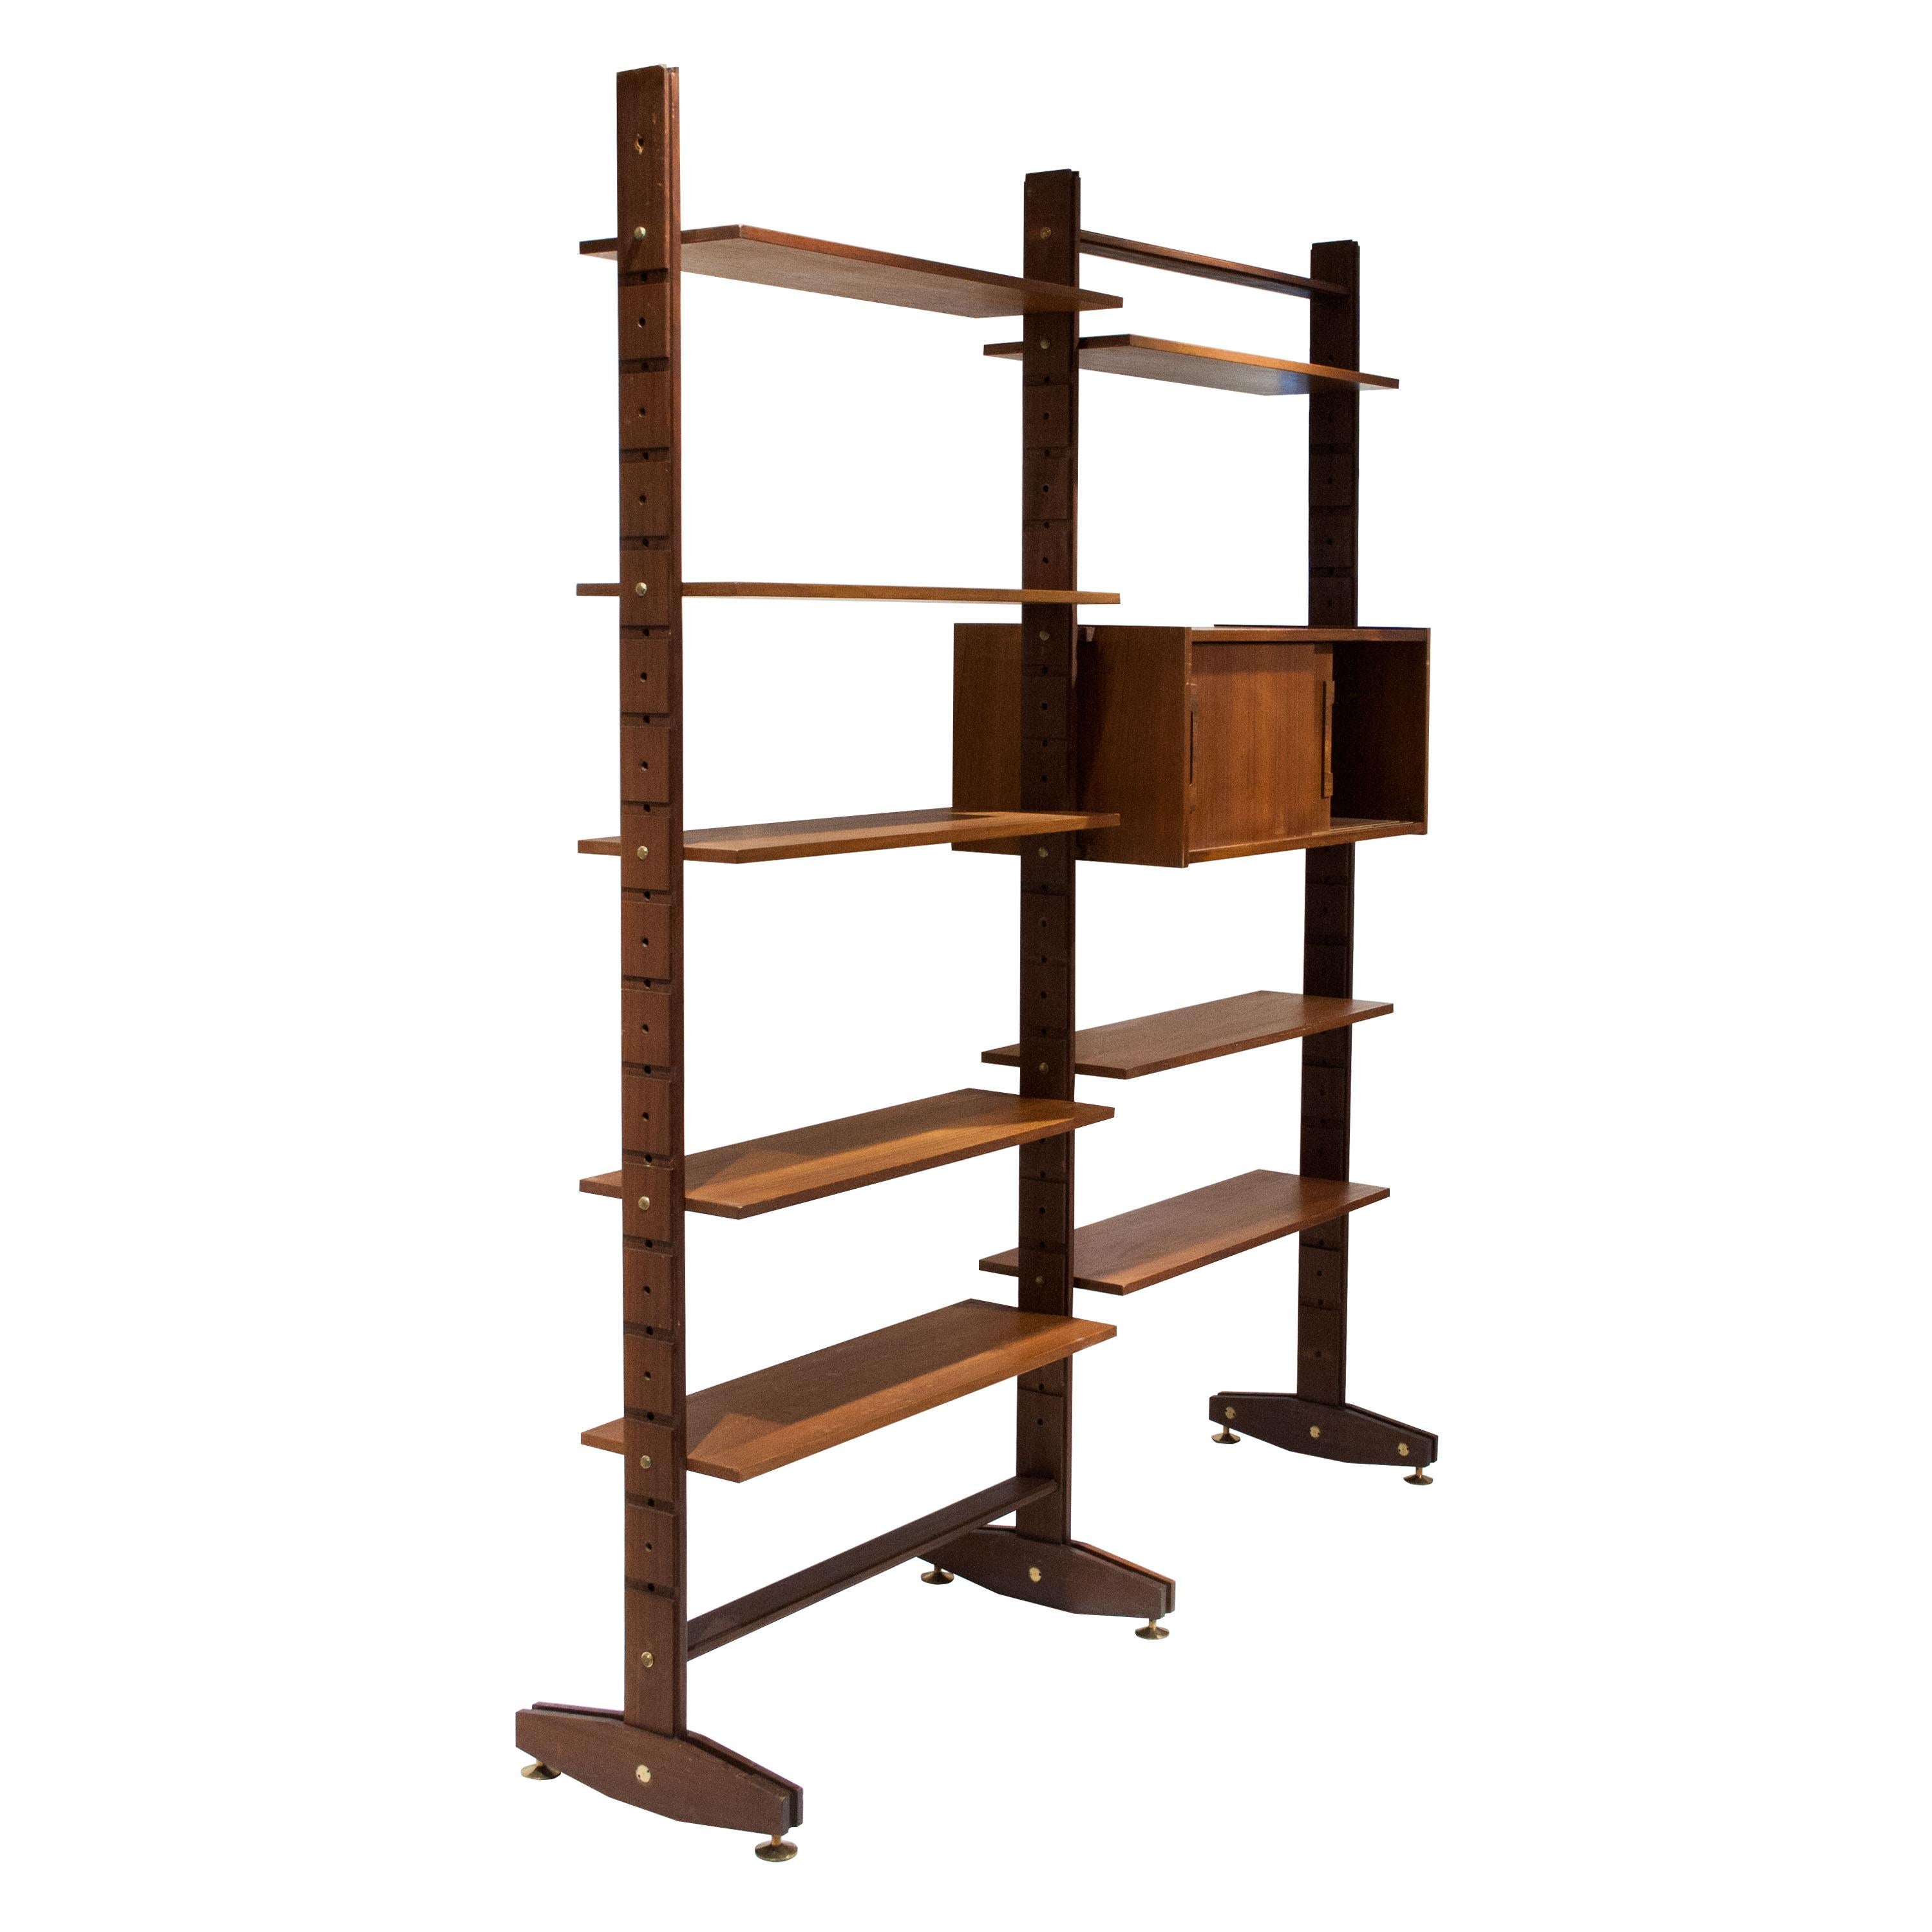 Mid-Century Modern modular bookcase made of teak wood. The bookcase is composed of three foots where you can attach the shelves and a 2 sliding door storage cabinet. Screws and adjustable feet made of brass.